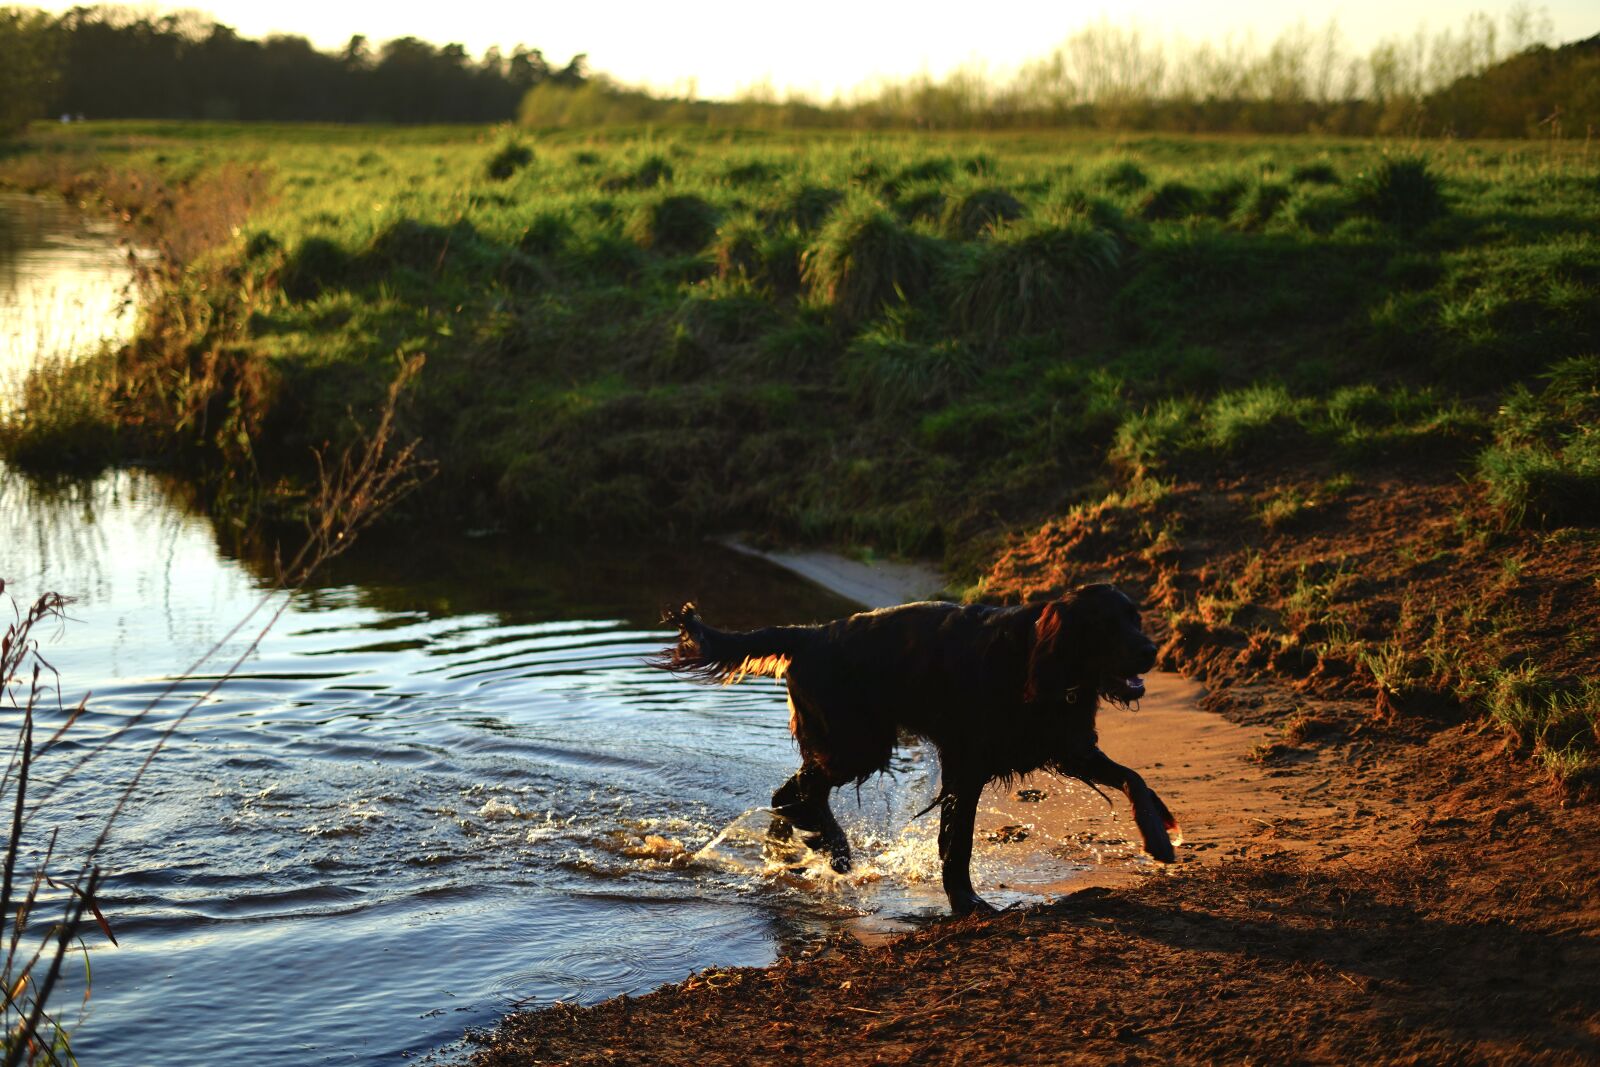 Sony a7 III sample photo. Dog, water, nature photography